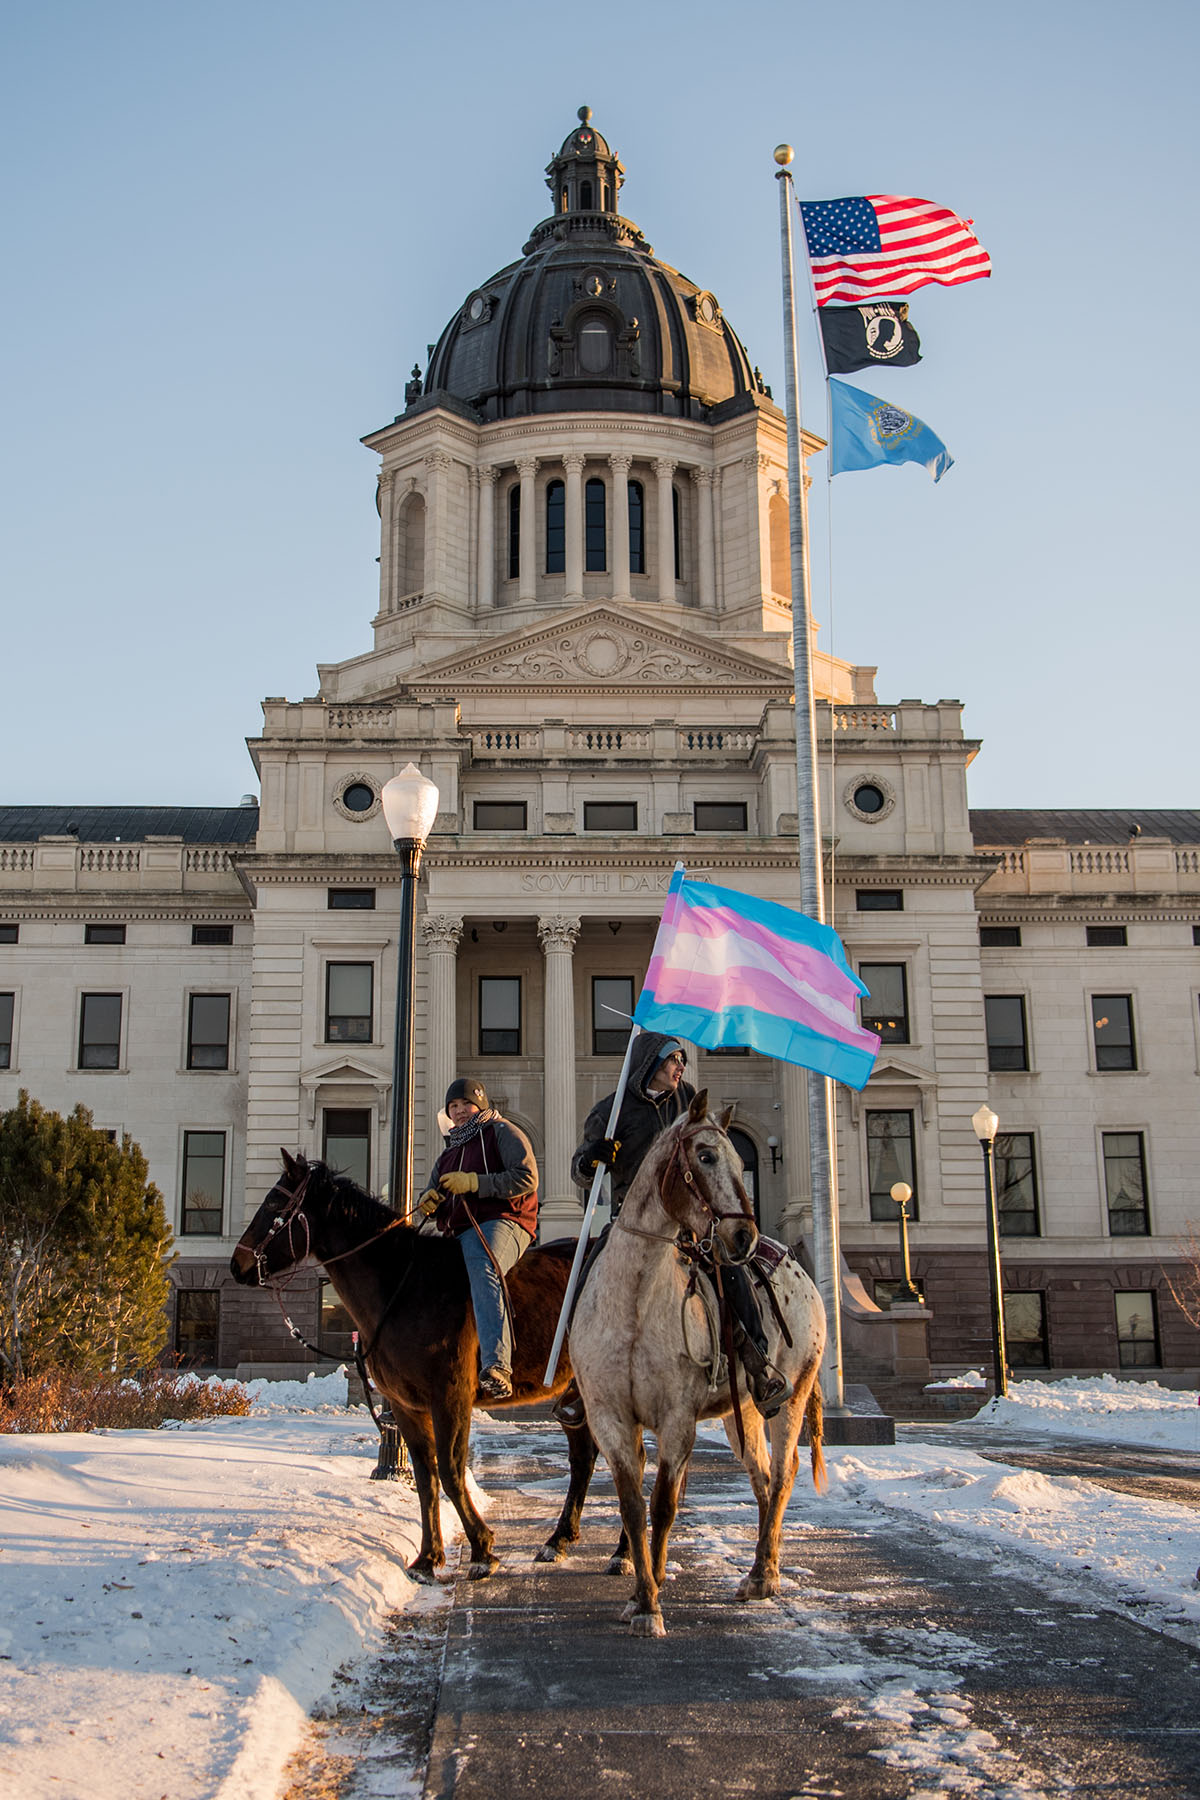 Two Native riders are seen on the South Dakota Capitol lawn on horseback.